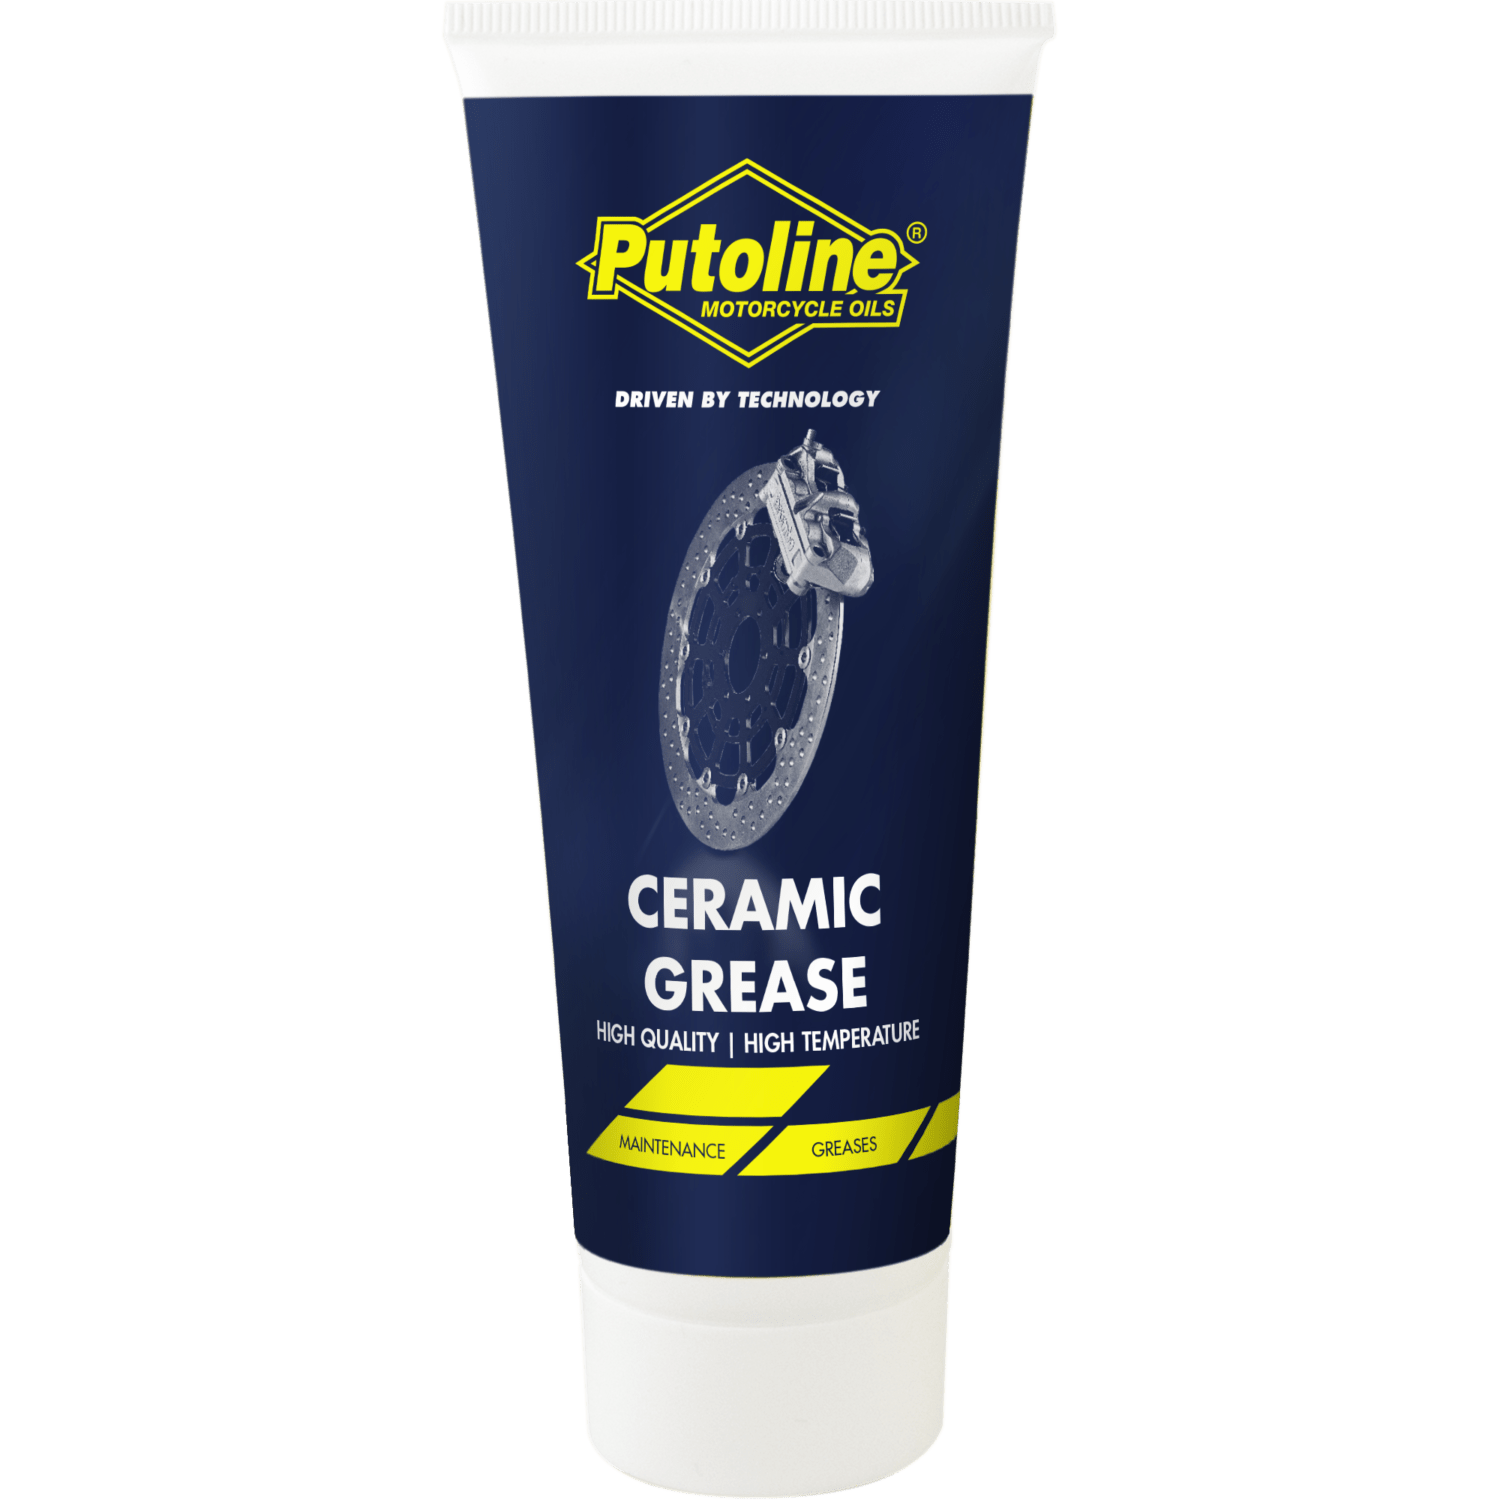 A dark blue 100G Tube for Putoline Ceramic Grease. The bottle features yellow and white writing.